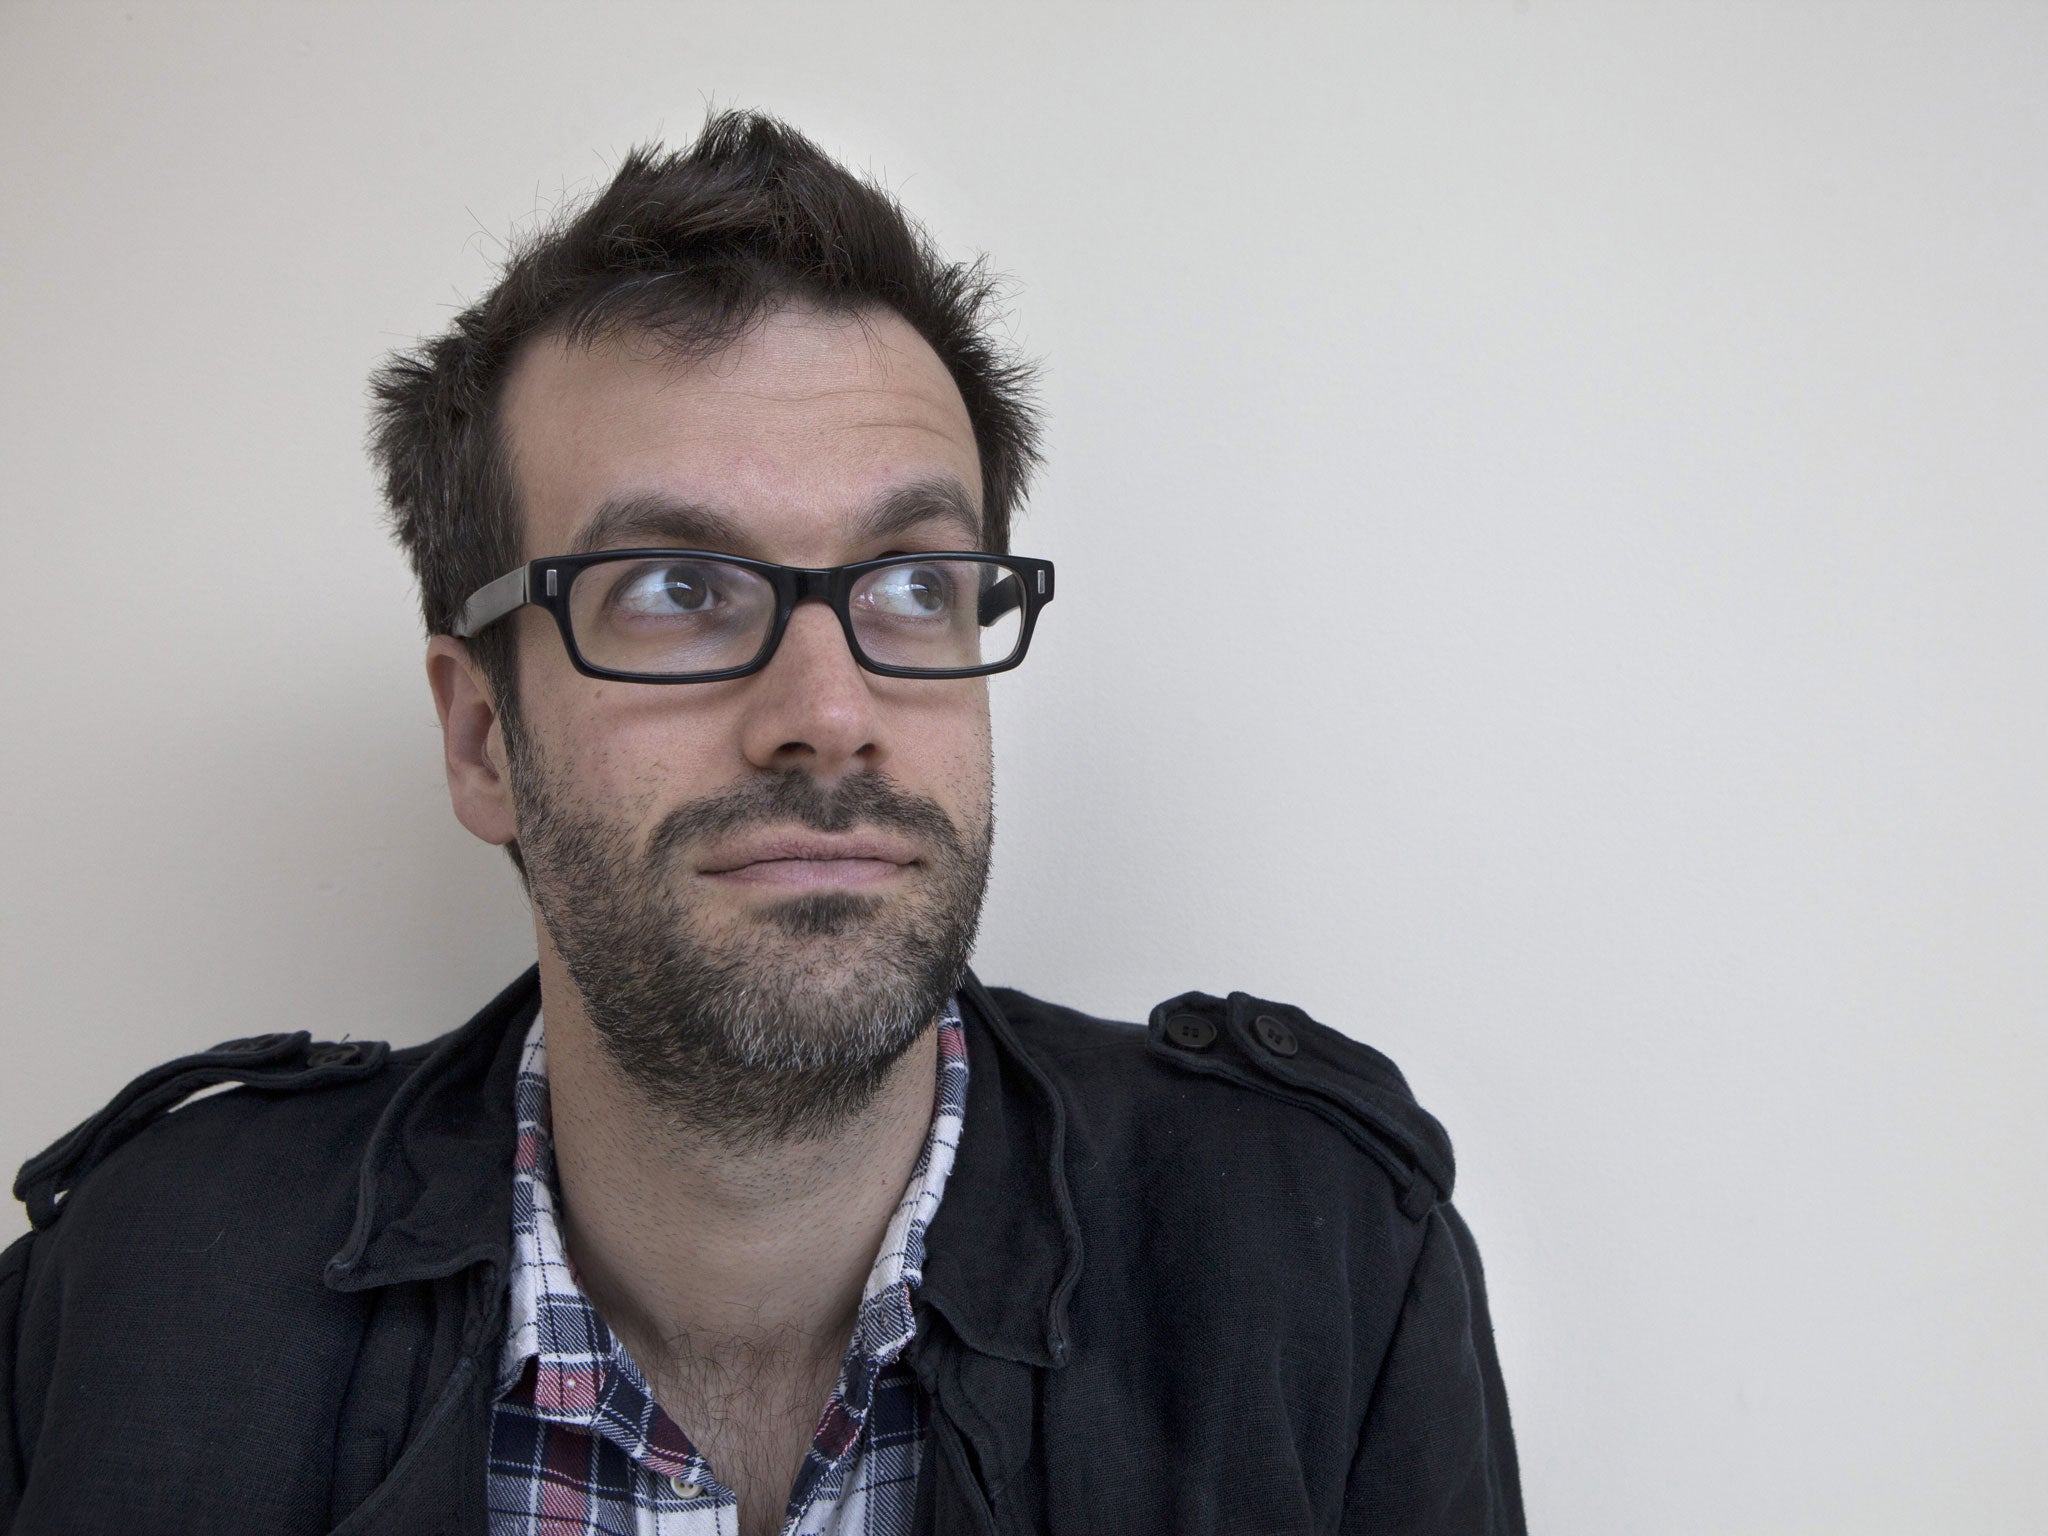 Marcus Brigstocke's new show, 'Je M'accuse - I am Marcus' lays his personal life bare